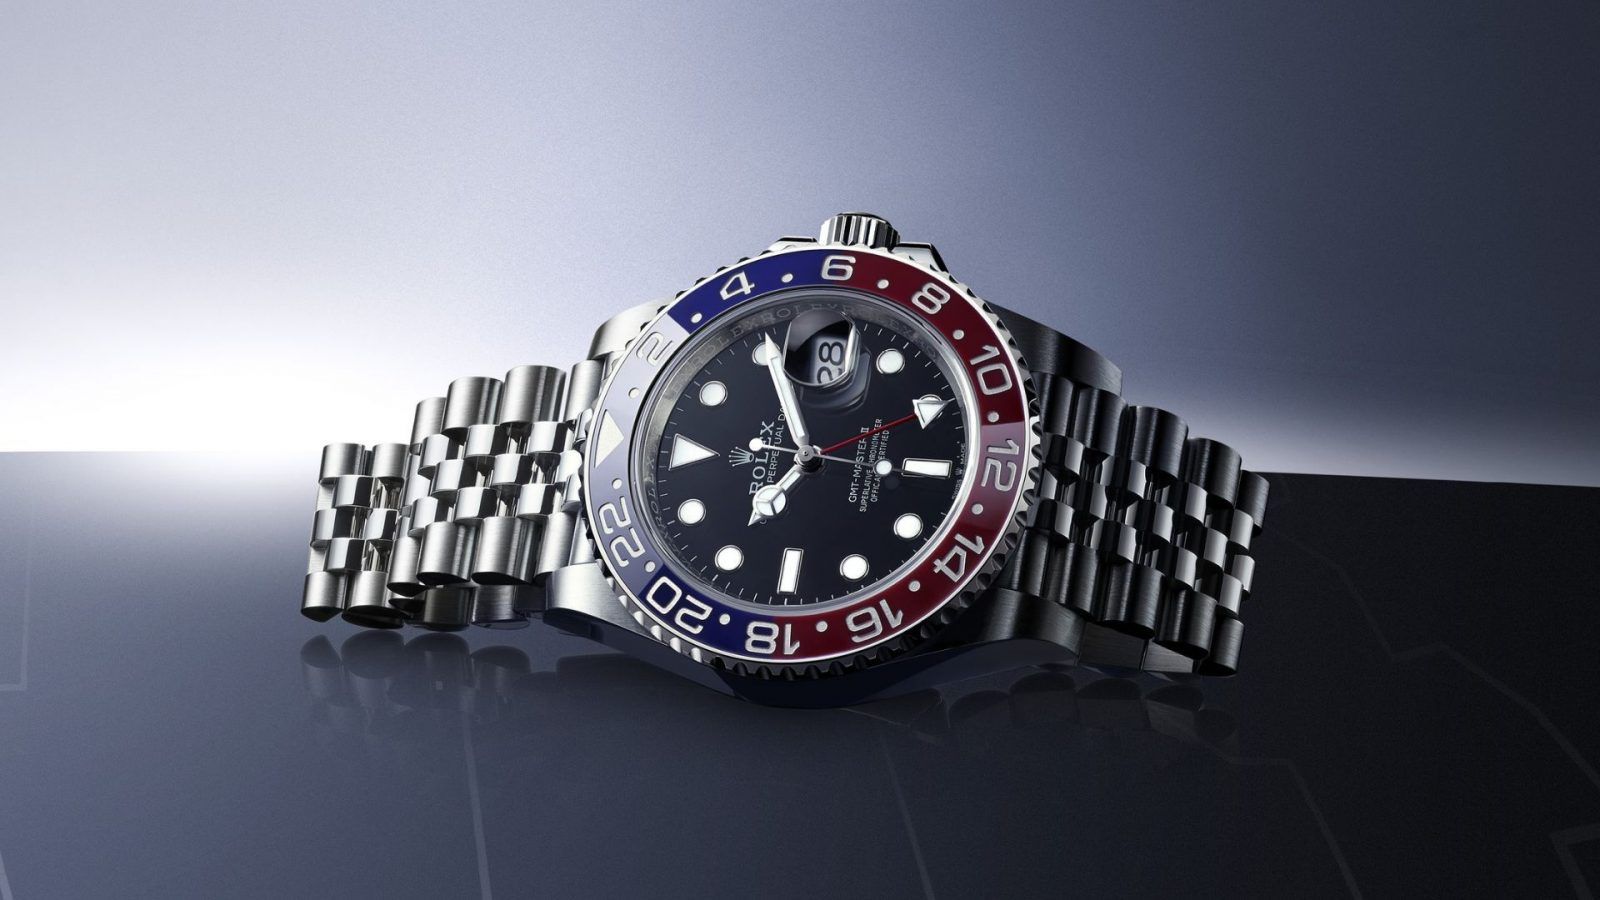 Air-King To Submariner: Top 11 Rolex Watches To Invest In For A Timeless Collection